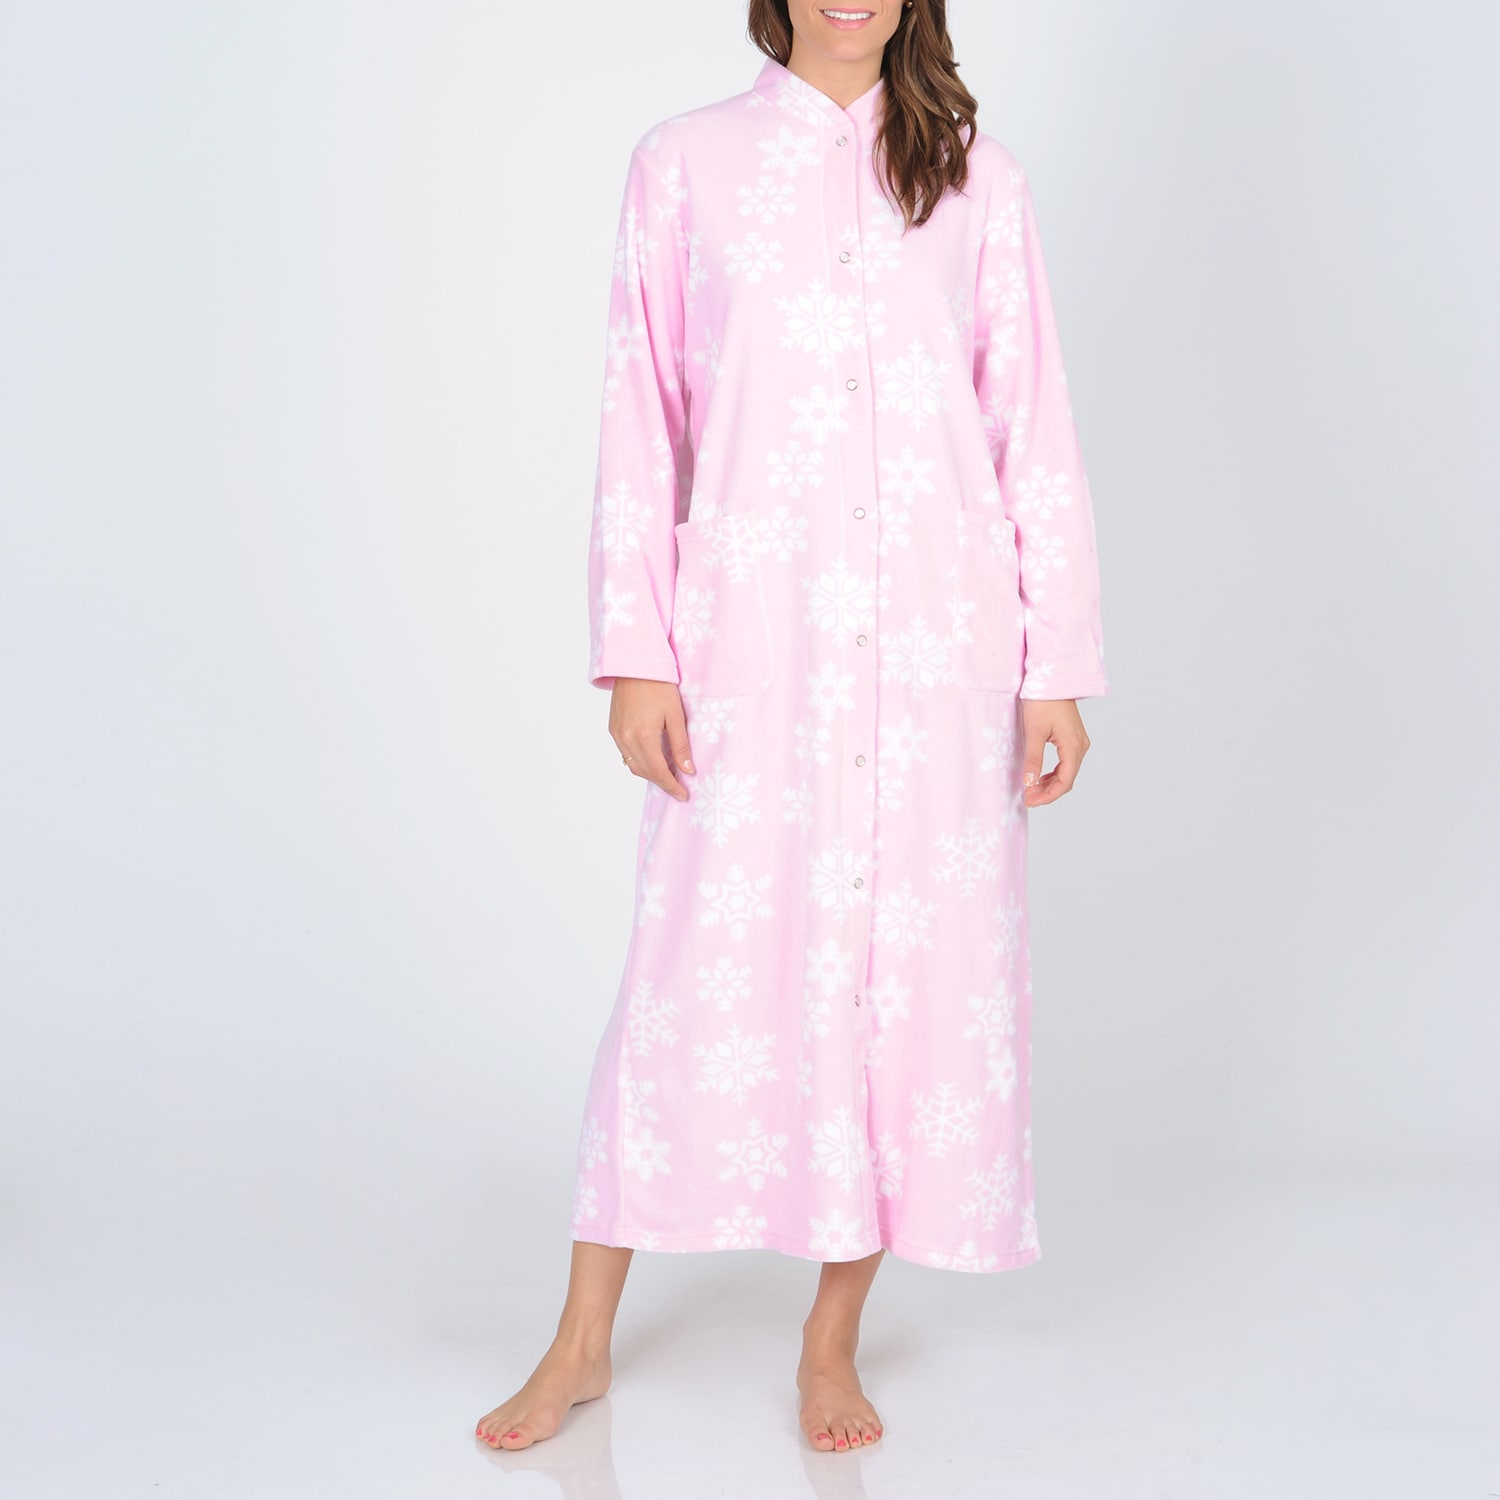 La Cera Womens Snowflake Print Fleece Robe (PinkSnowflake printLong sleevesStand collarSnap front closureTwo (2) pouch pocketsApproximate length from top center back to hem is 52 inches. Measurement was taken from a size smallMeasurement Guide Click here 